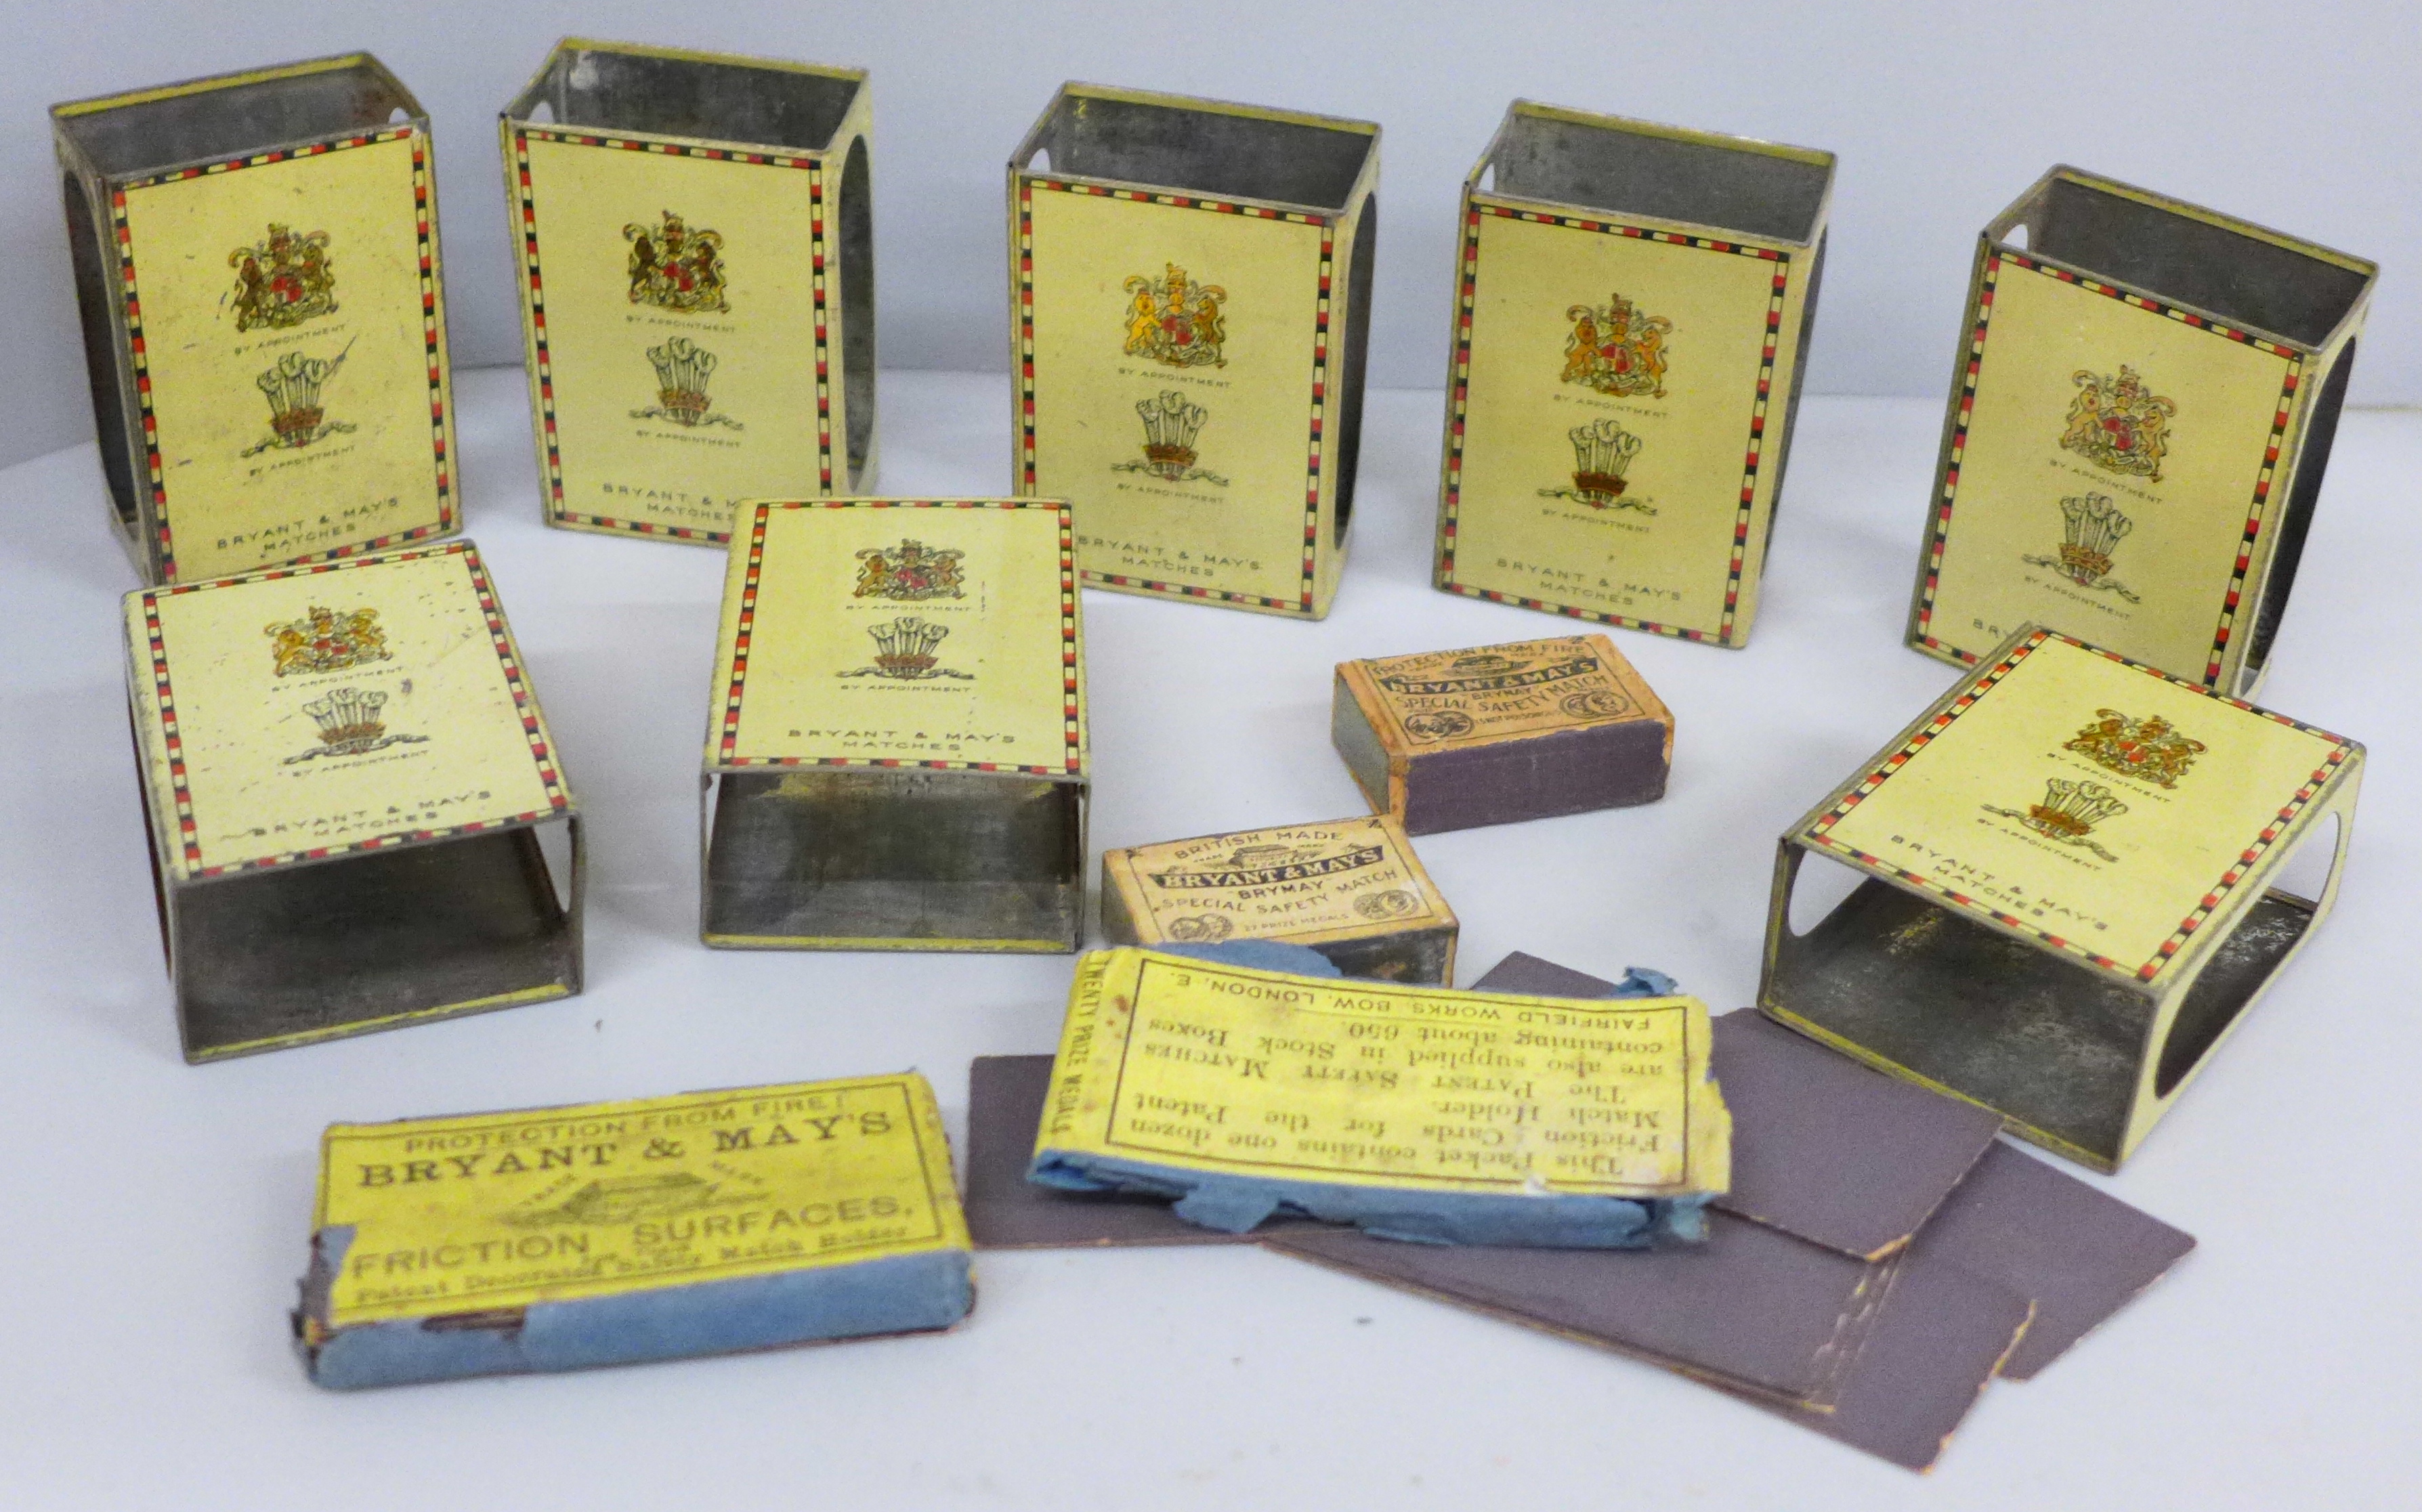 Eight Bryant & May's tin plate matchbox covers and other boxes of matches